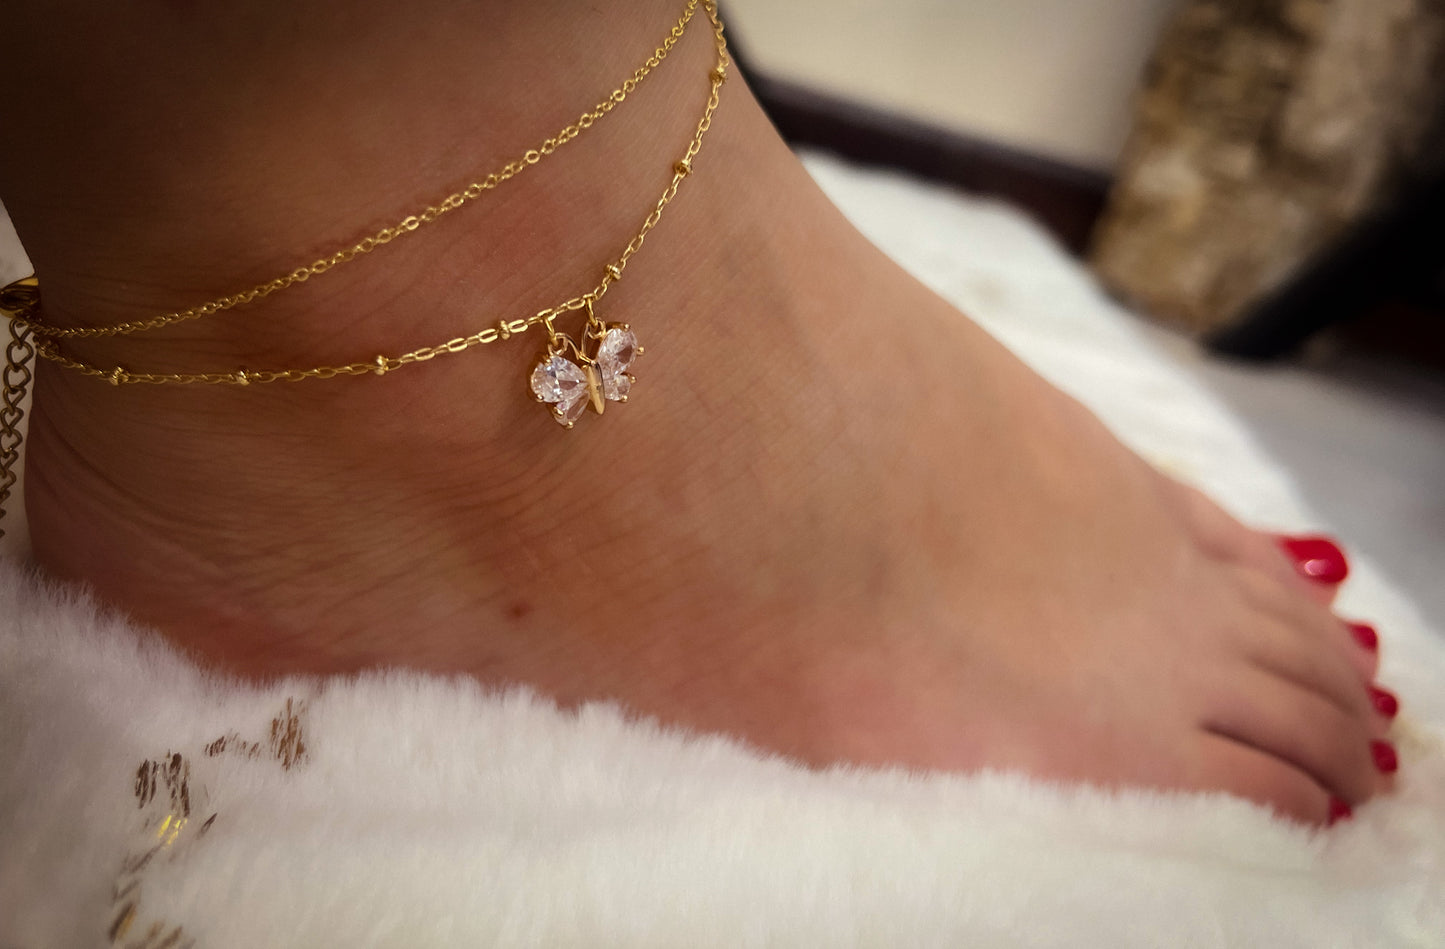 Iris ankle chain Body Jewerly 18k gold and stainless steel